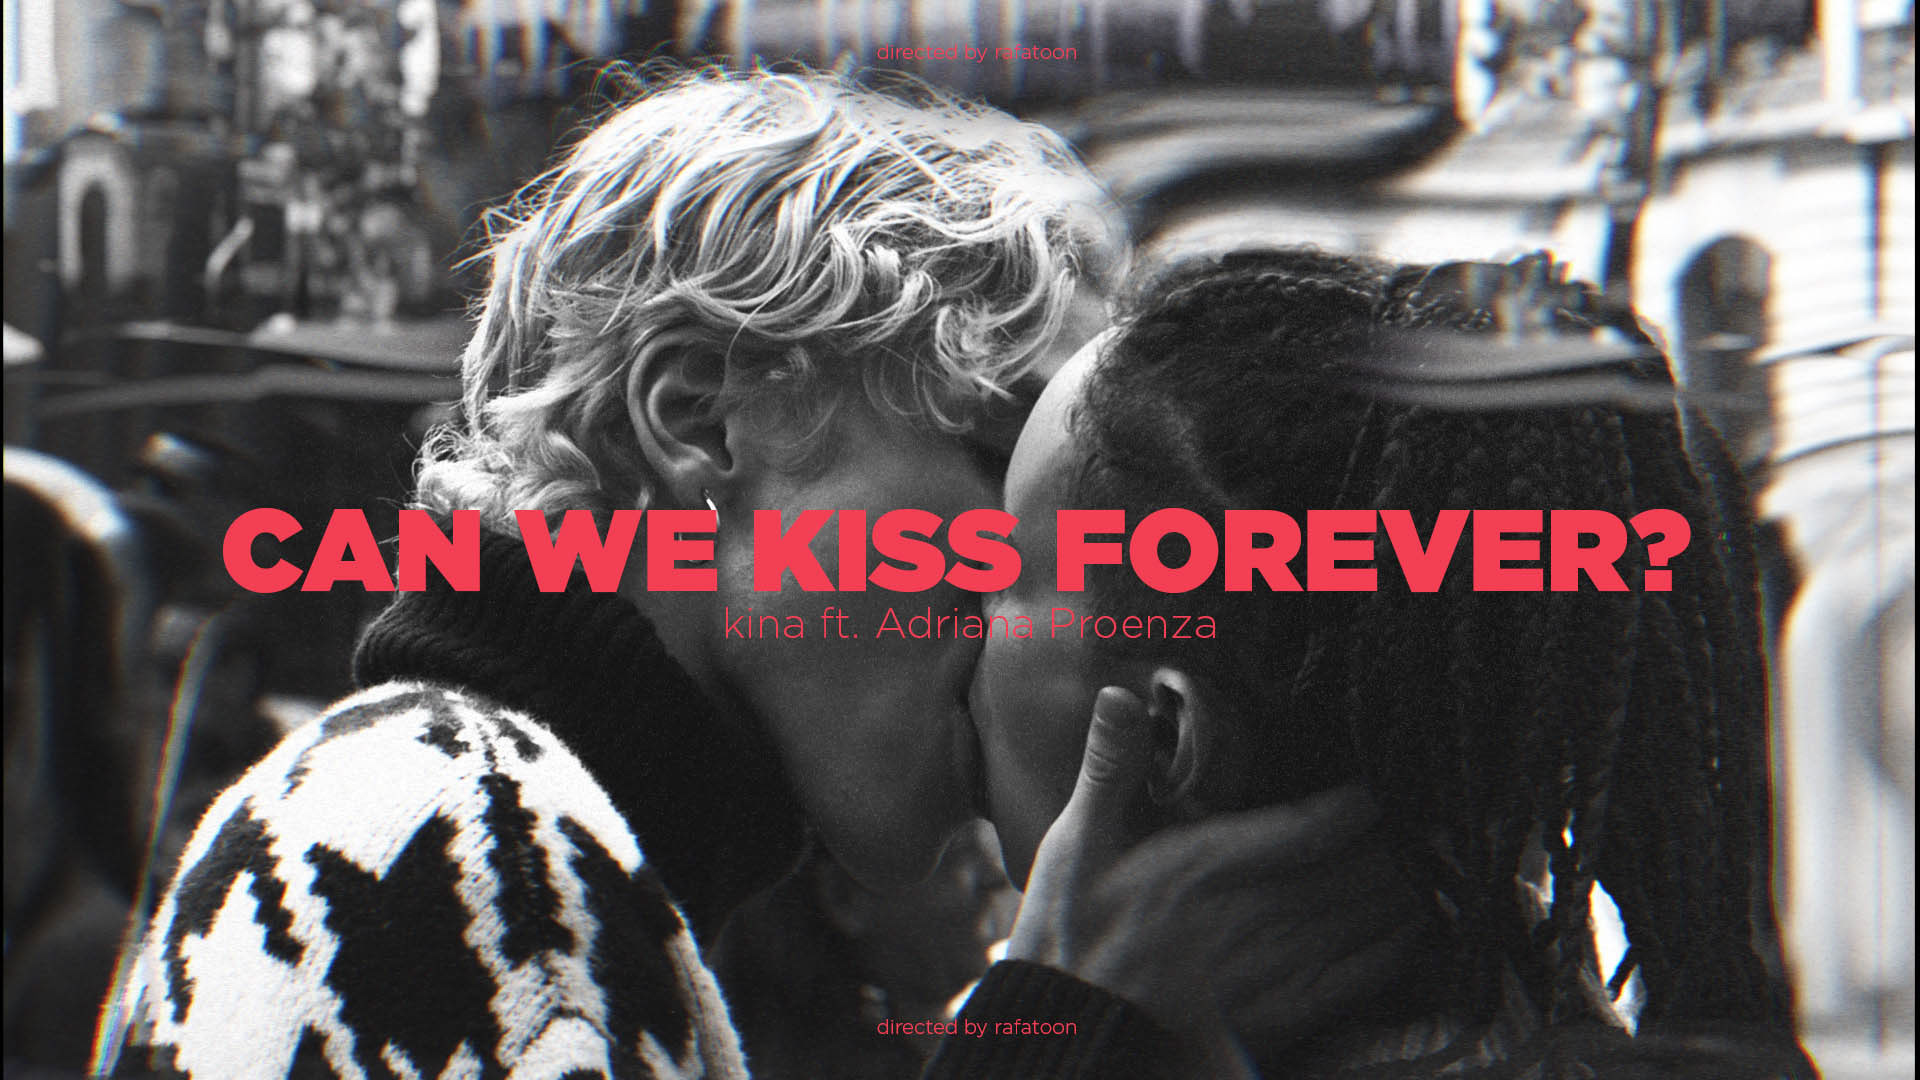 Kina Ft Adriana Proenza Can We Kiss Forever On Behance